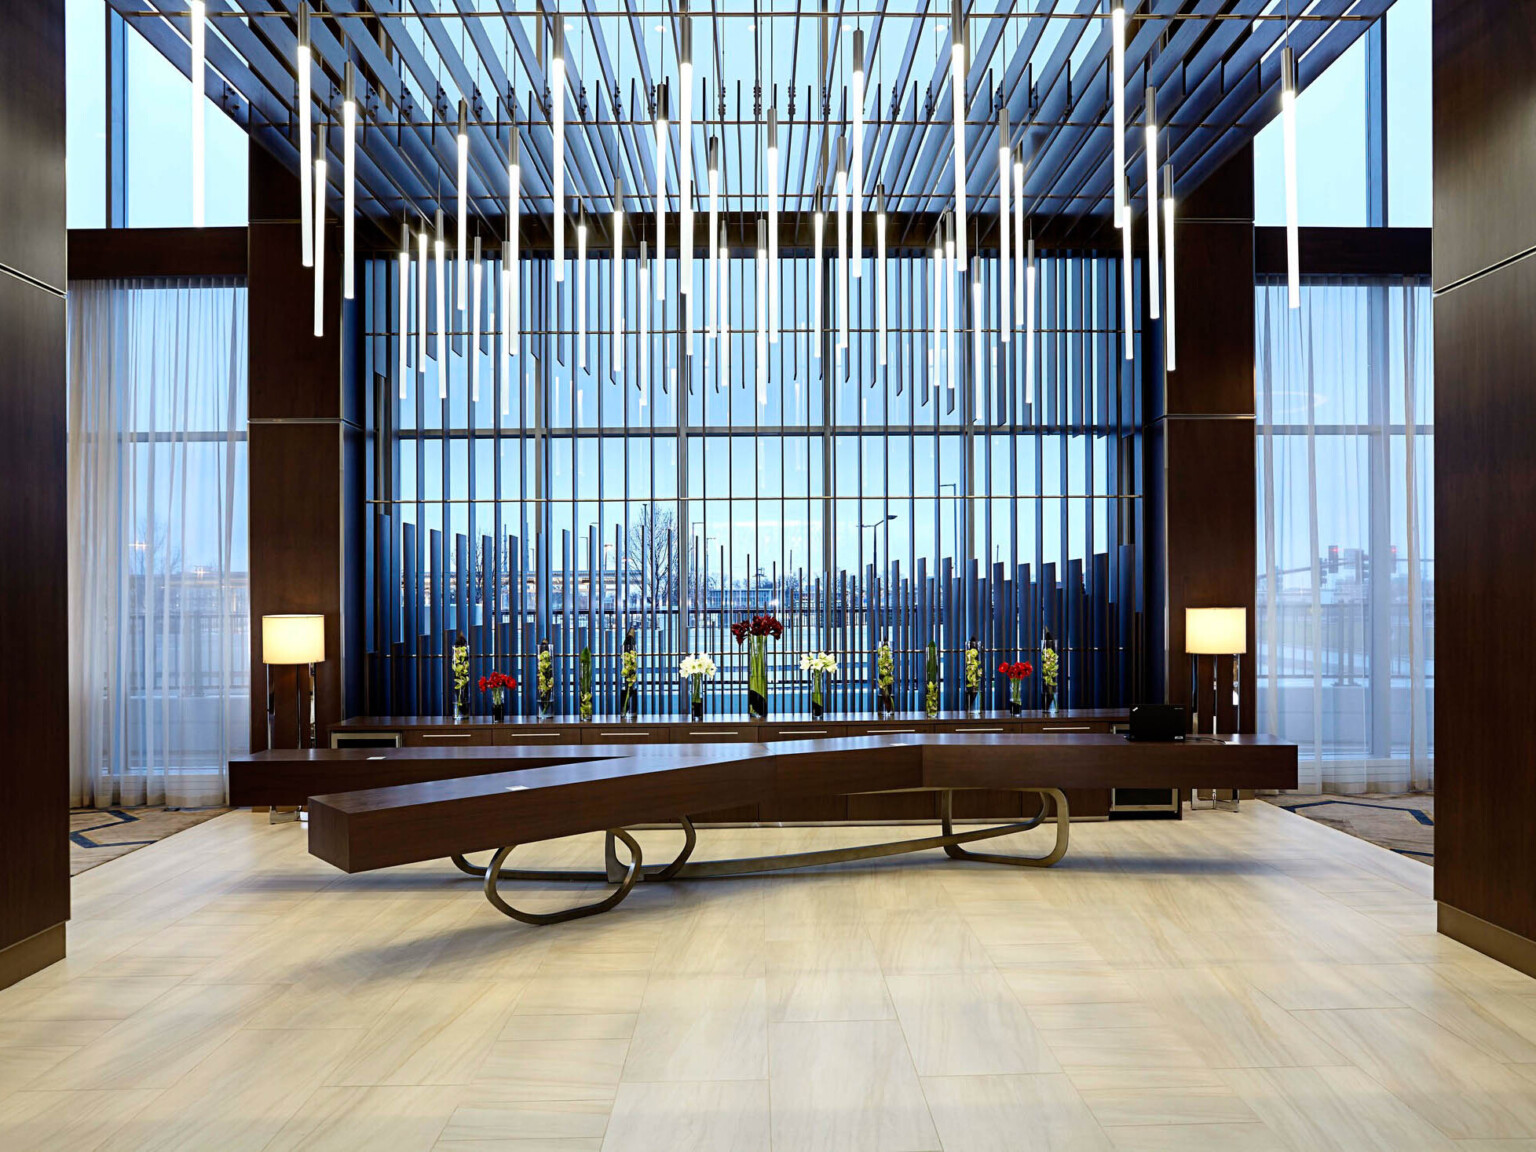 Hotel lobby area with modern seating and light suspended from the ceiling